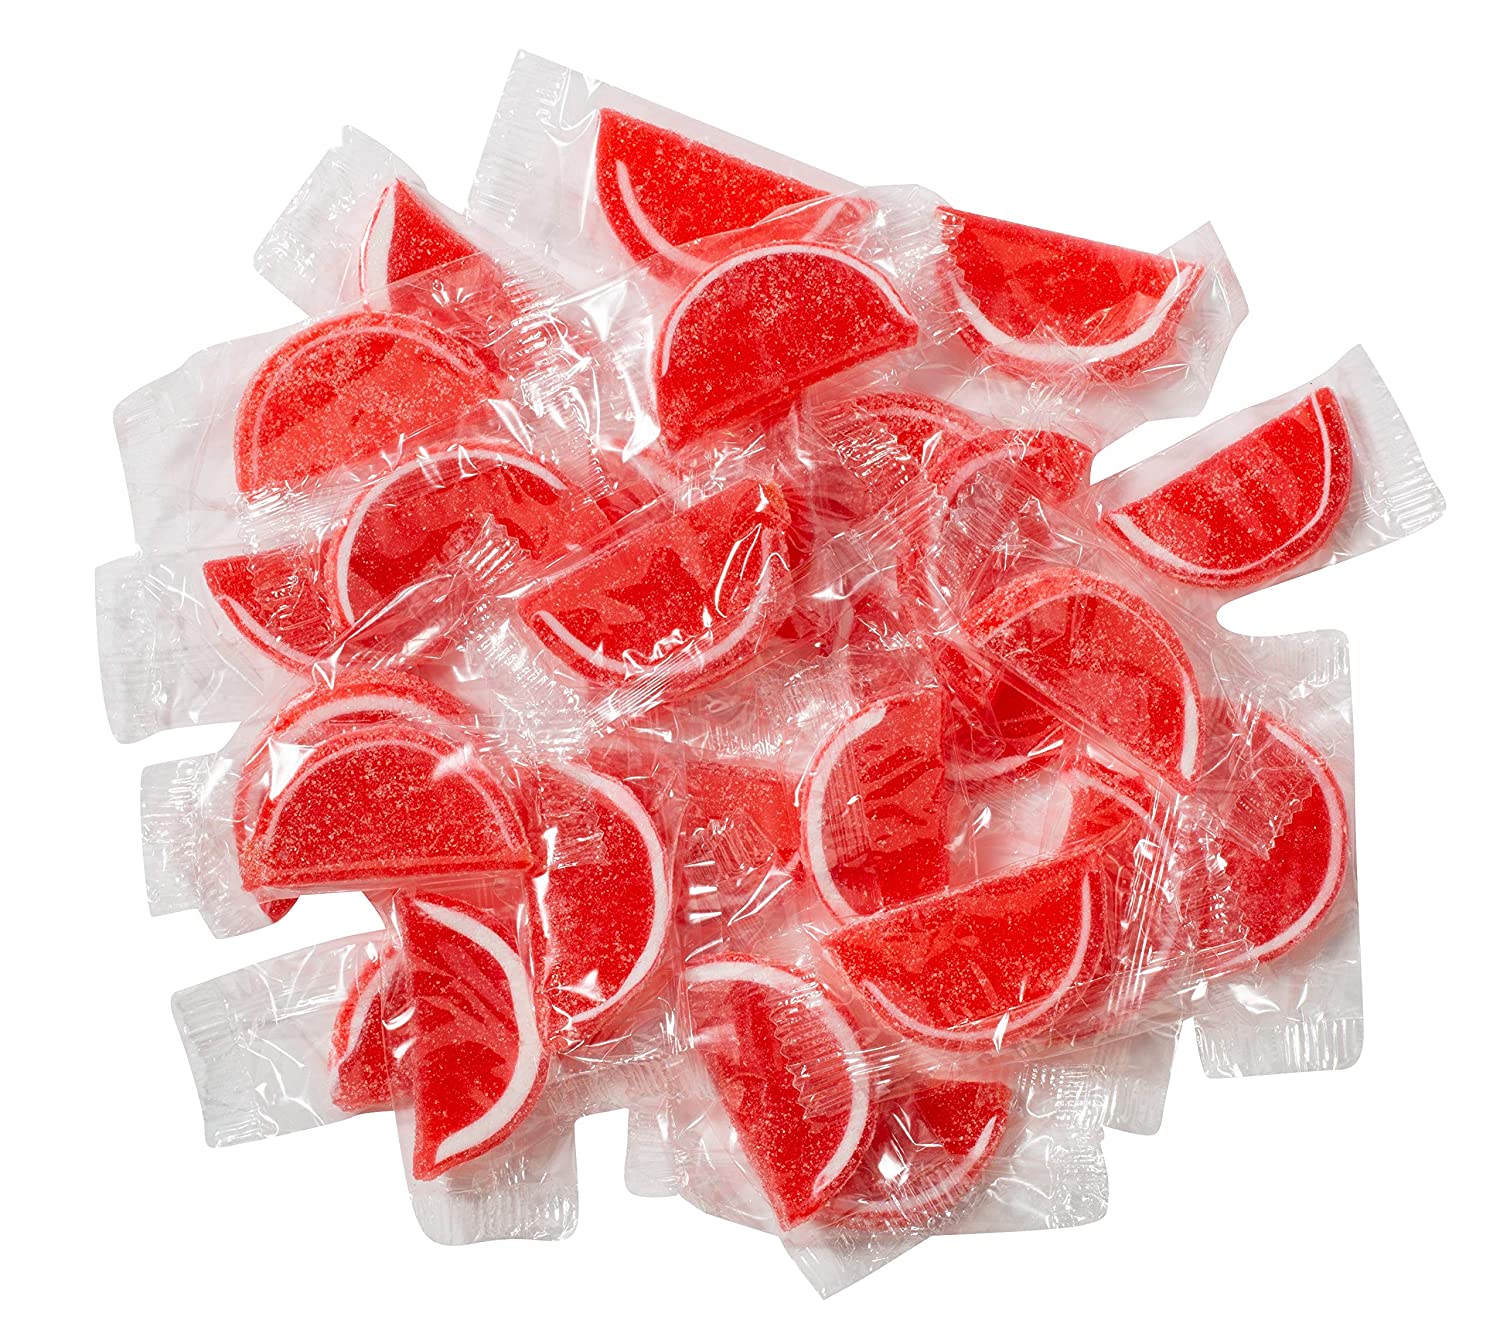 Sugar Free Candy Fruit Slices